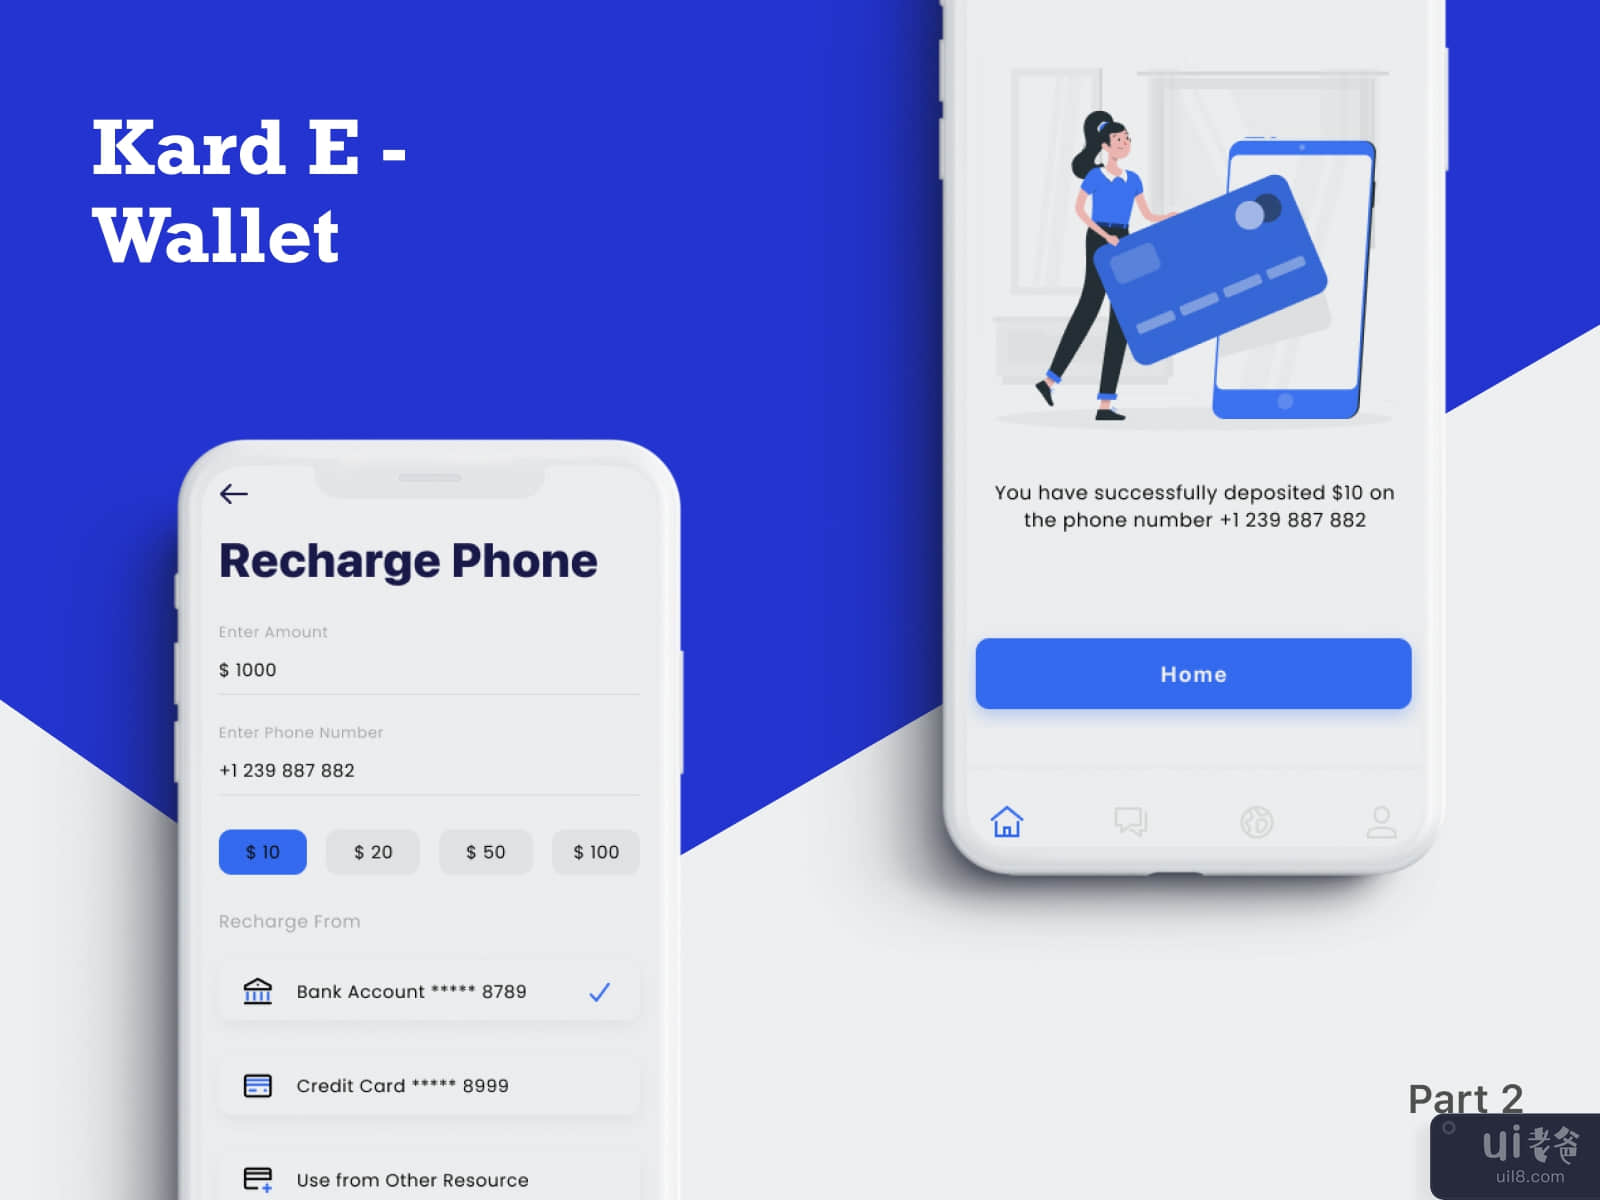 Recharge The Phone Screen Kard E - Wallet